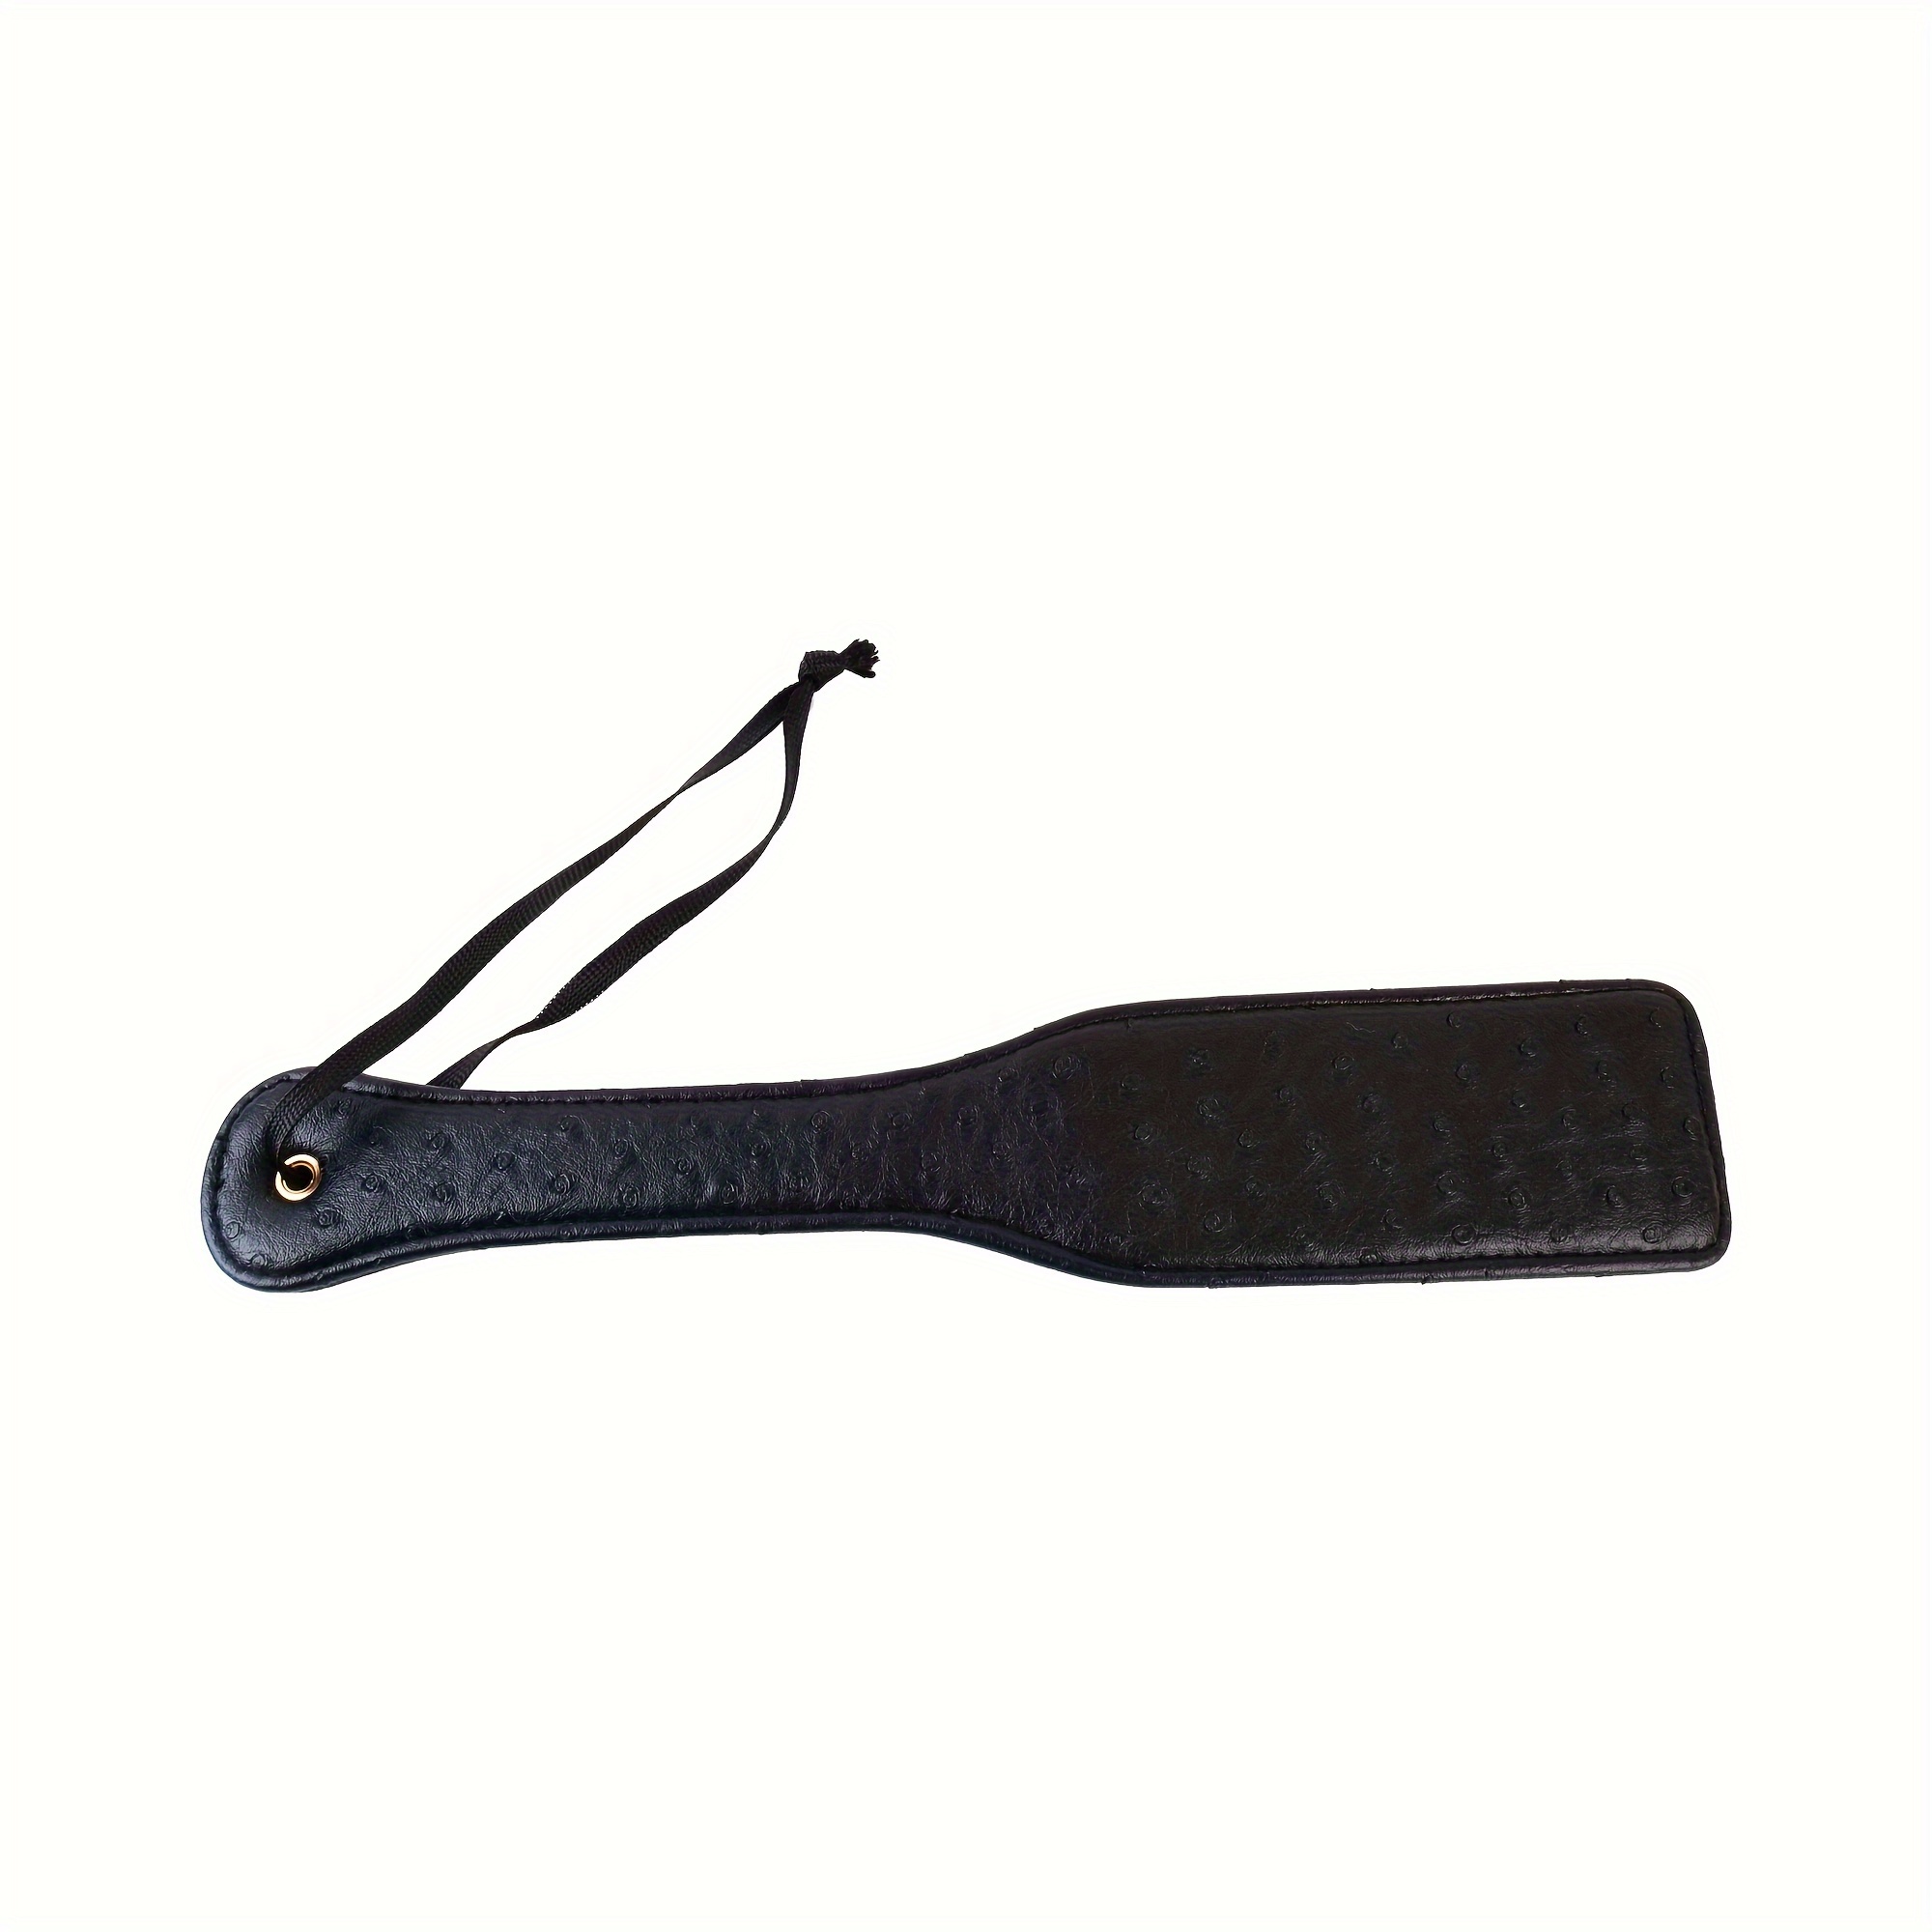  Spanking Paddle for Sex Adult Play,Textured Rubber